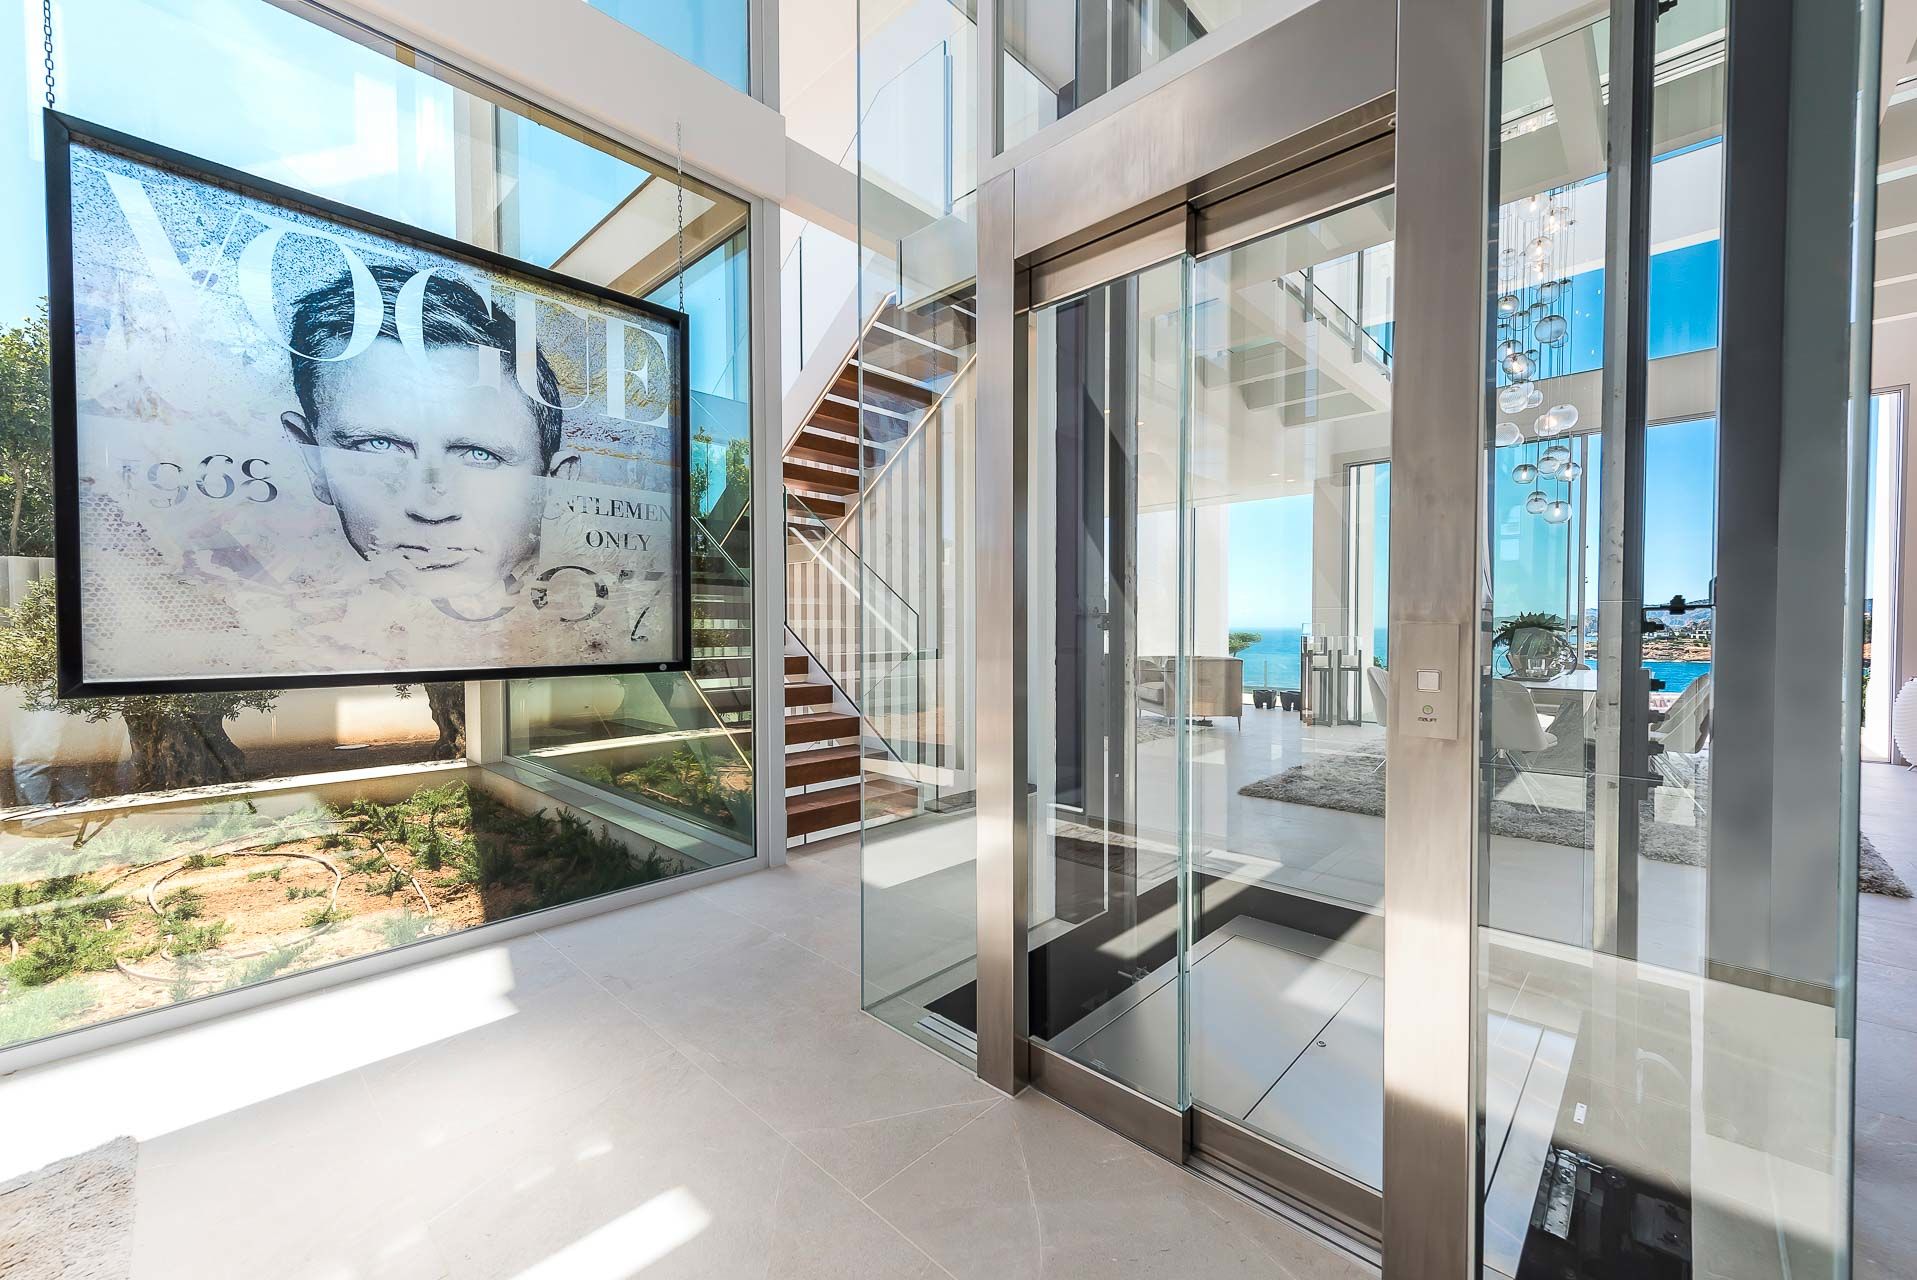 Entrance area with glass elevator